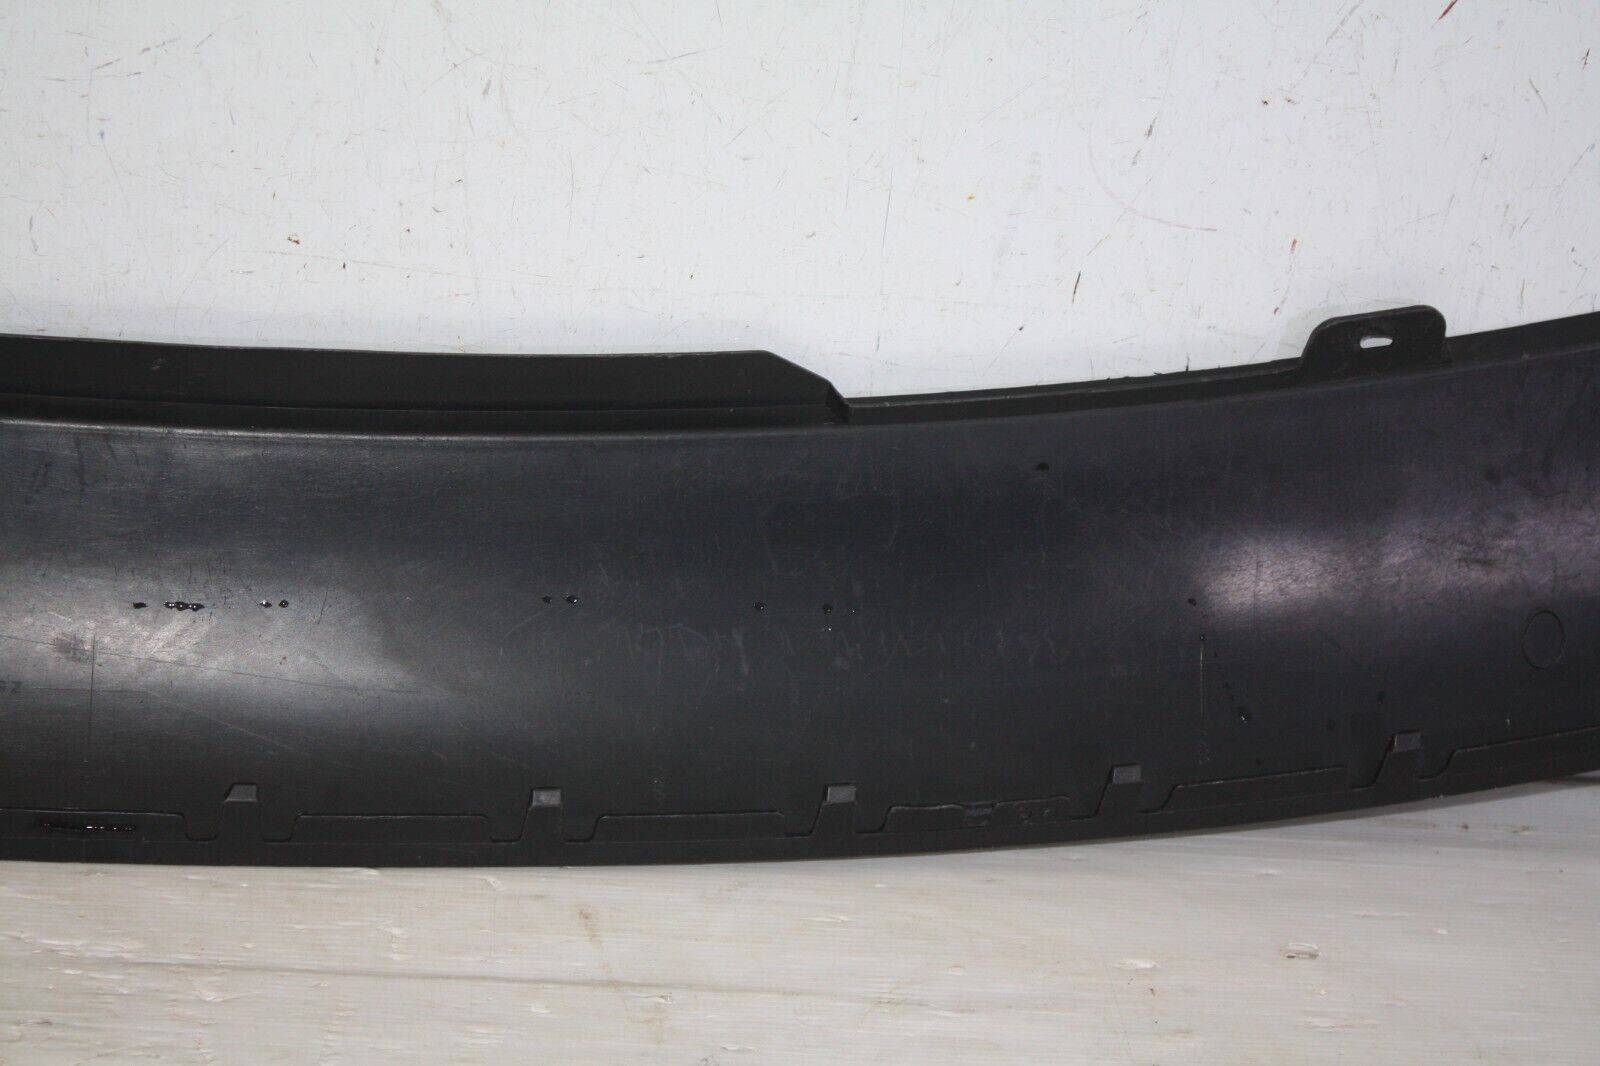 VW-Polo-Rear-Bumper-Lower-Section-2002-To-2005-6Q6807521-Genuine-176093468813-13